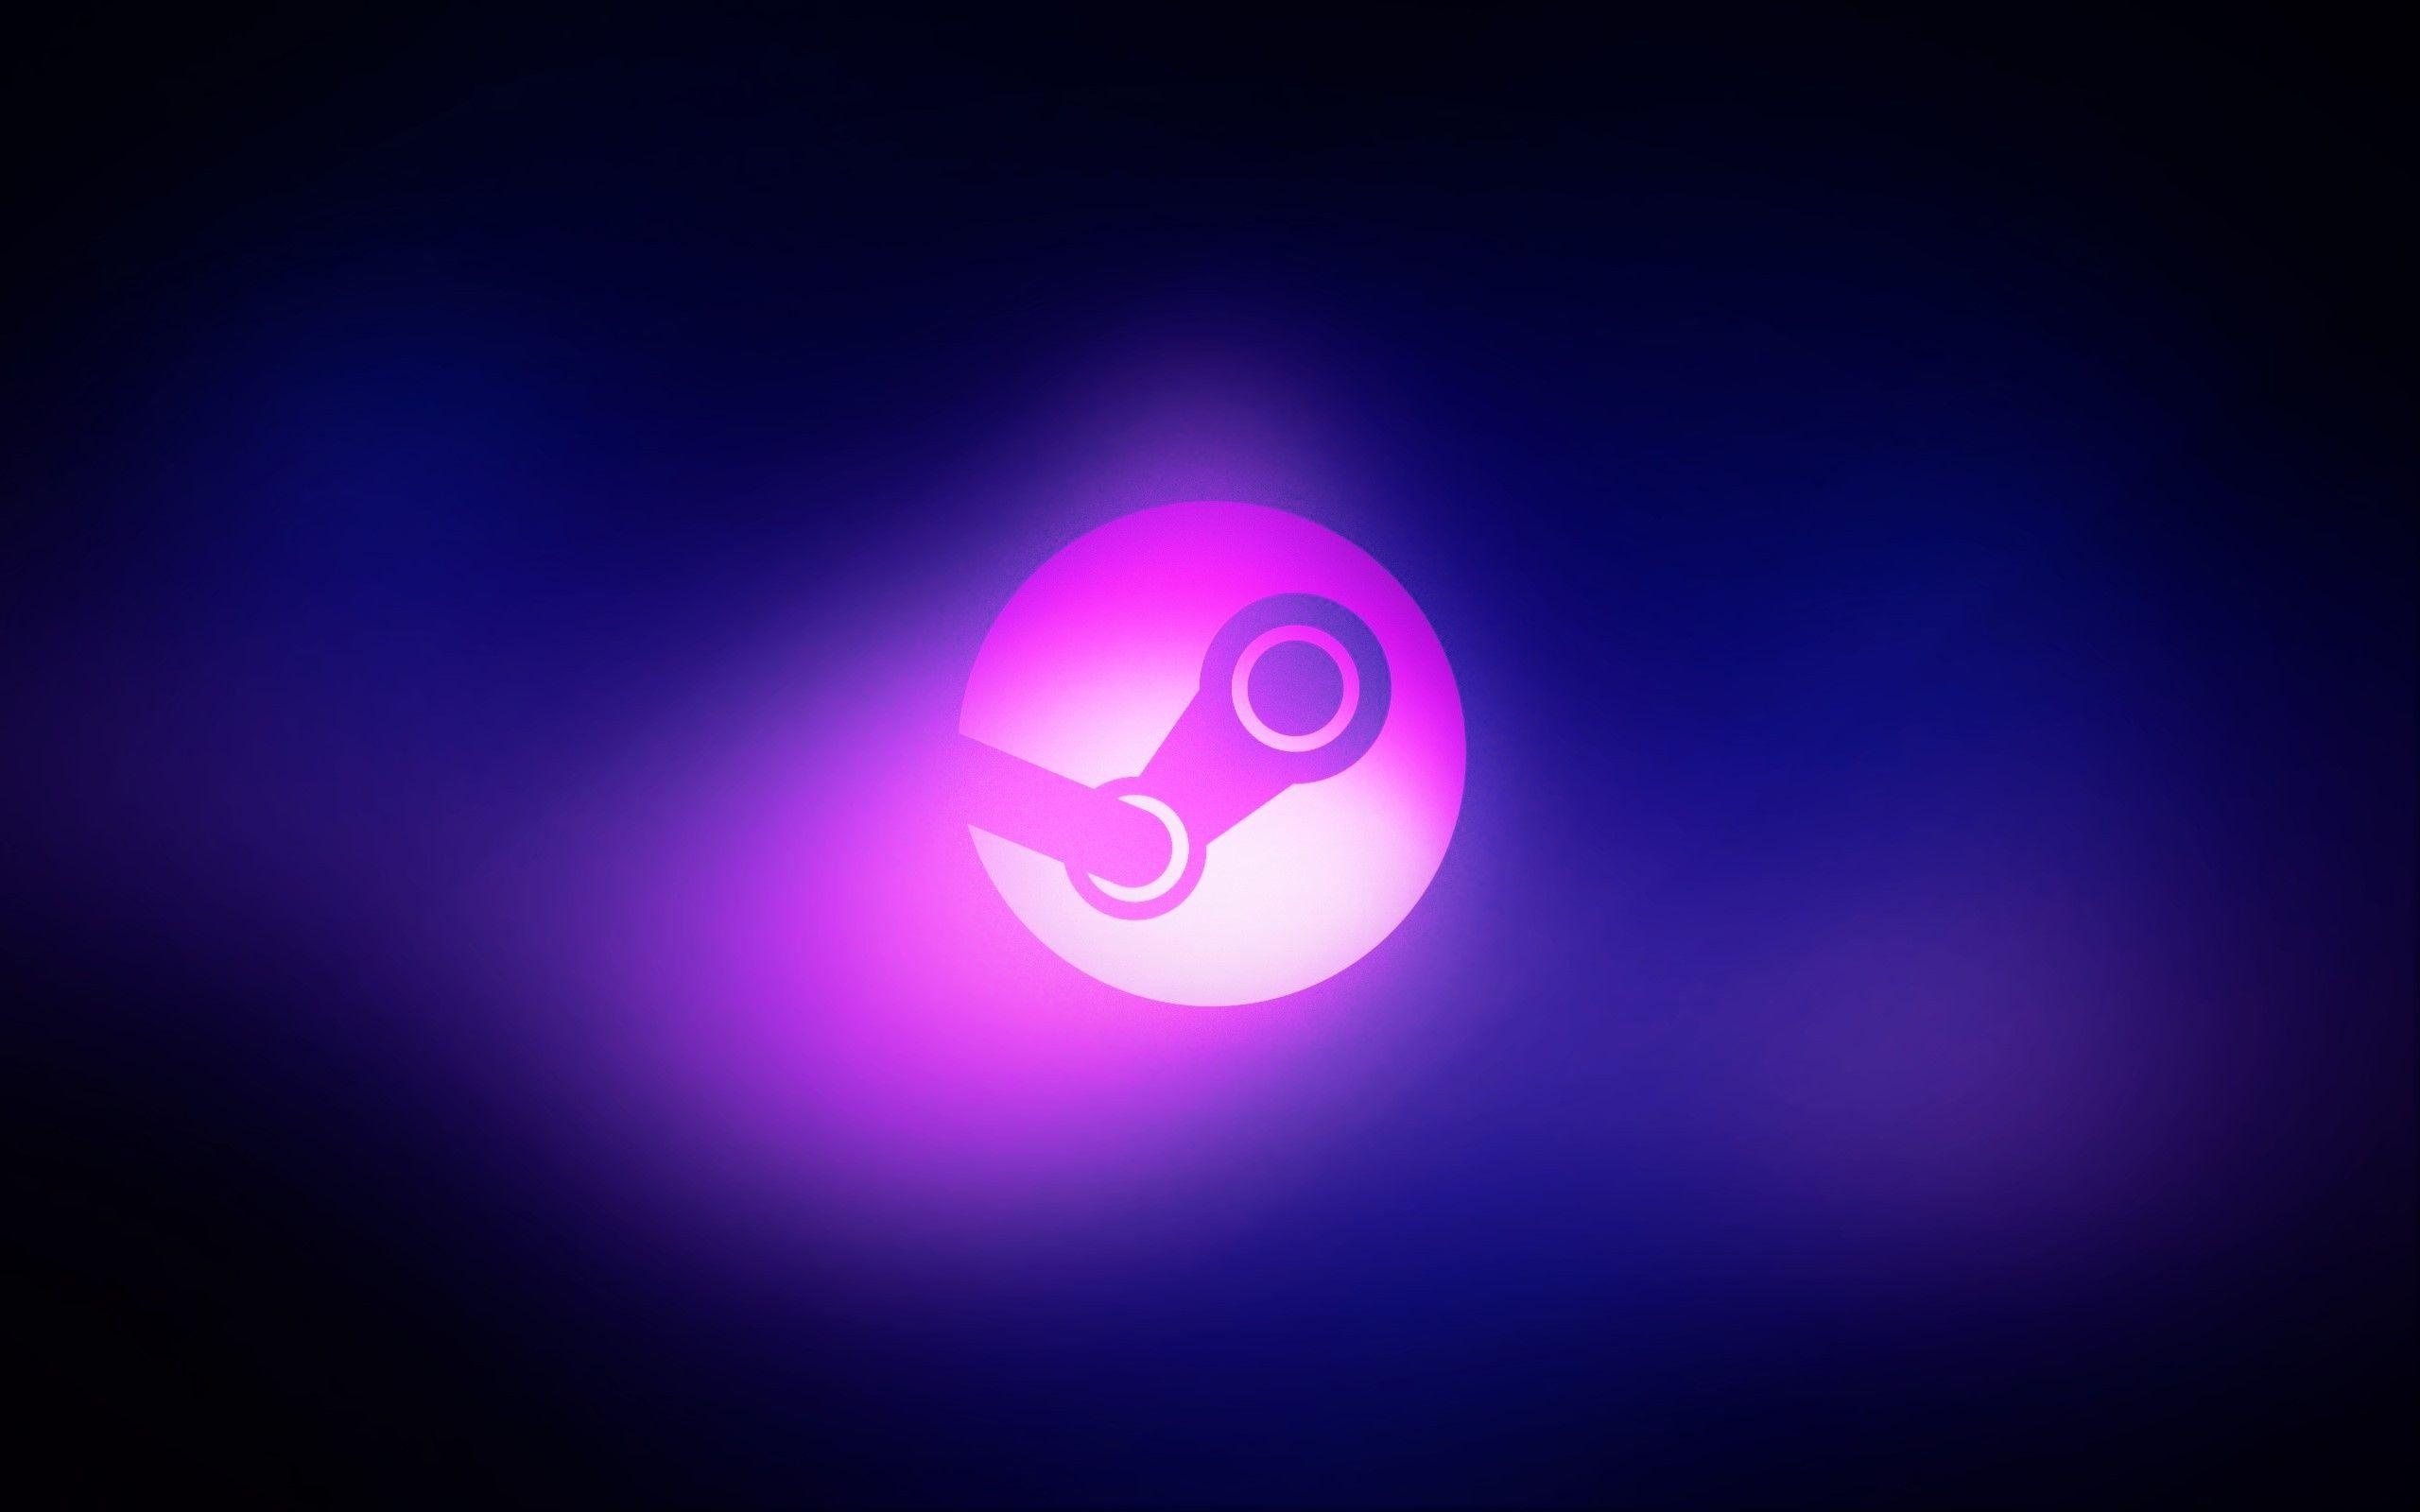 Steam: A gaming community where players and game developers can buy and sell video games online. 2560x1600 HD Wallpaper.